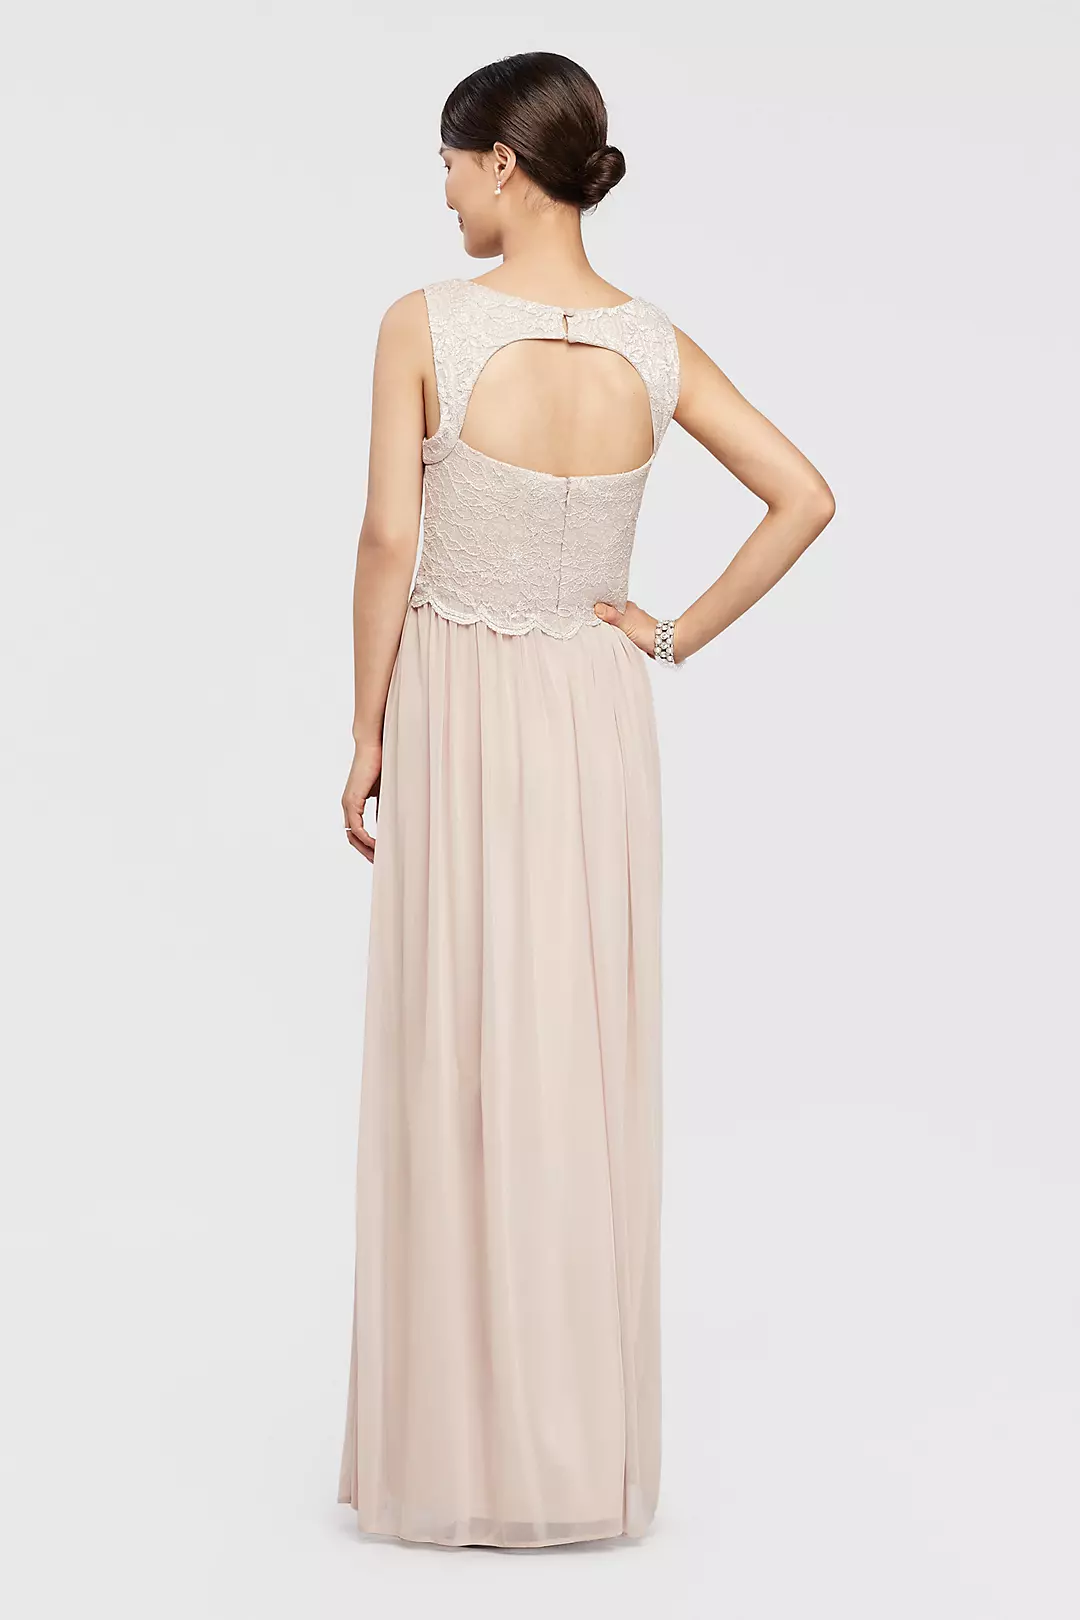 Mock Two Piece Long Dress with Glitter Bodice Image 2